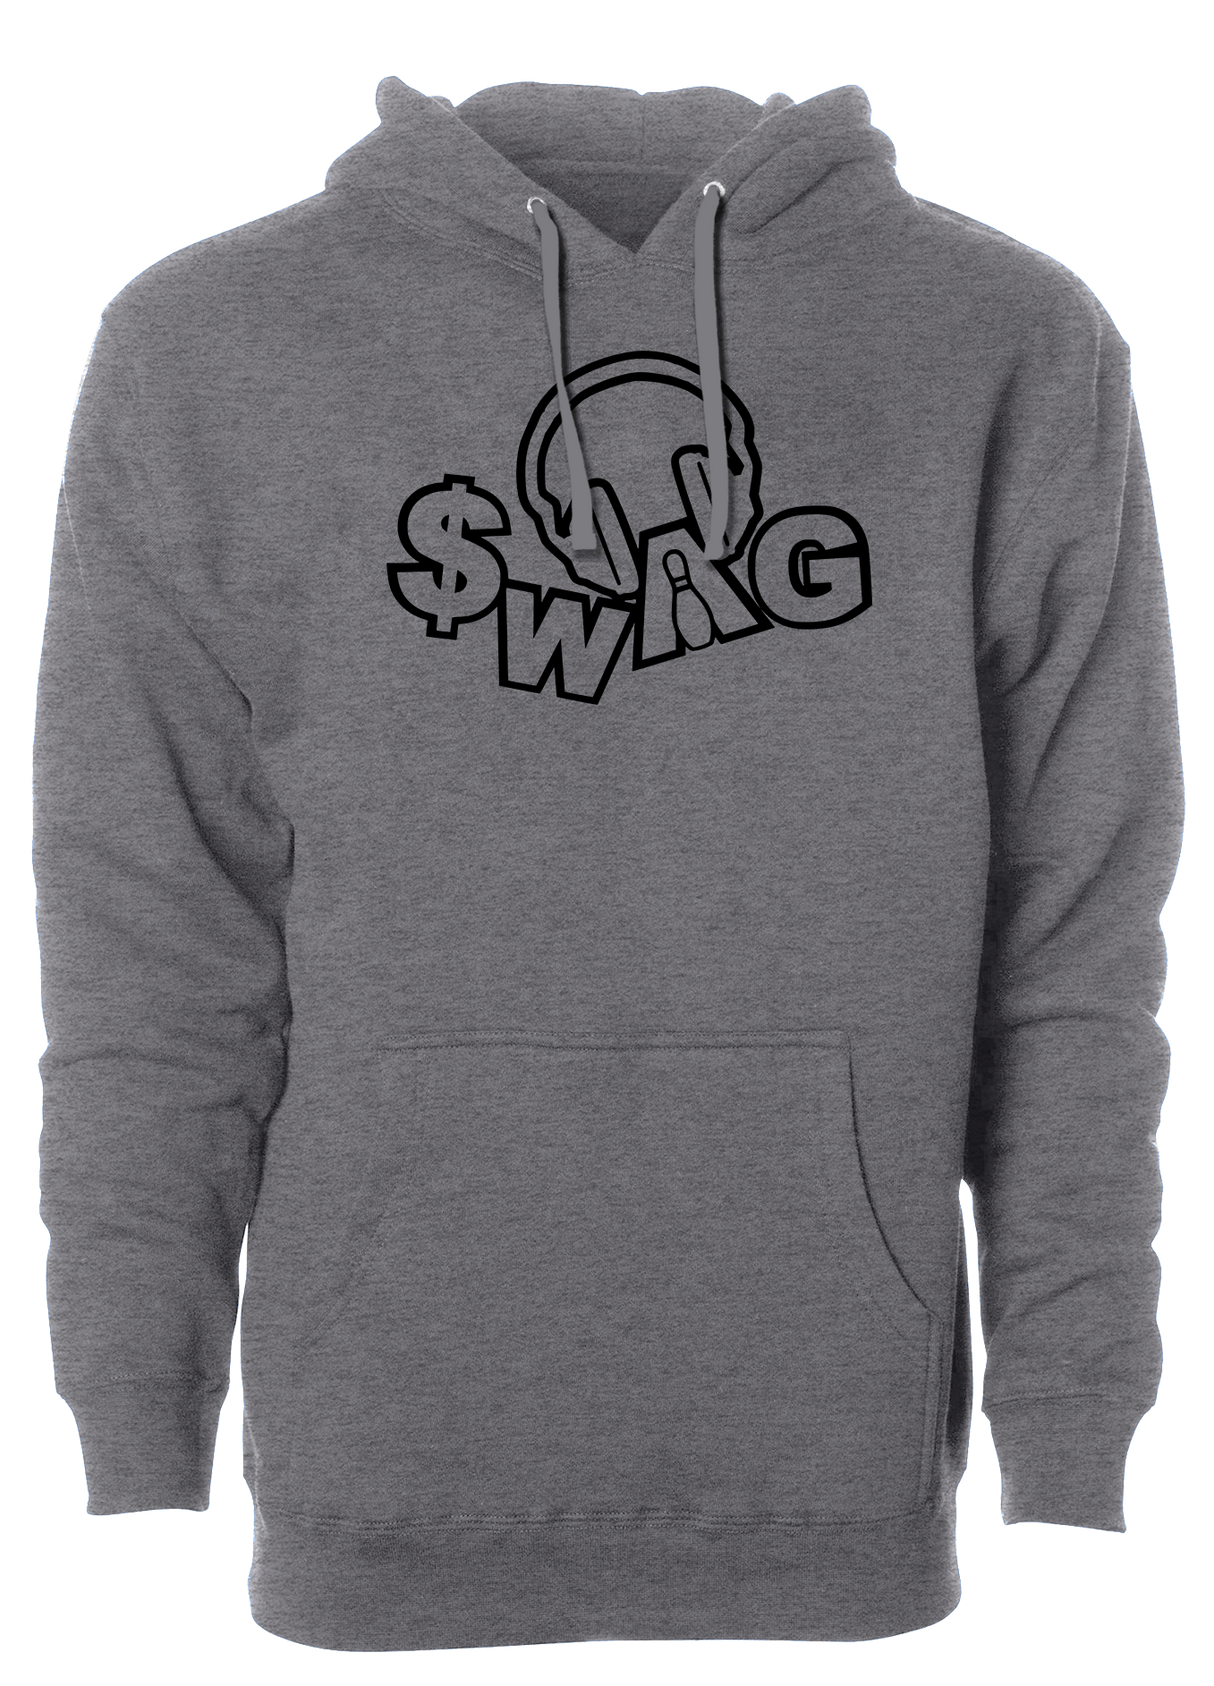 Keep warm in this stylish Swag Bowling Outline Logo design hooded sweatshirt. 60/40 cotton/polyester blend material Standard Fit Front pouch pocket Midweight Hoodie/Hooded Sweatshirt. Swag Bowling hoodie hooded sweatshirt big b team shirt comfortable clothing amazon ebay 